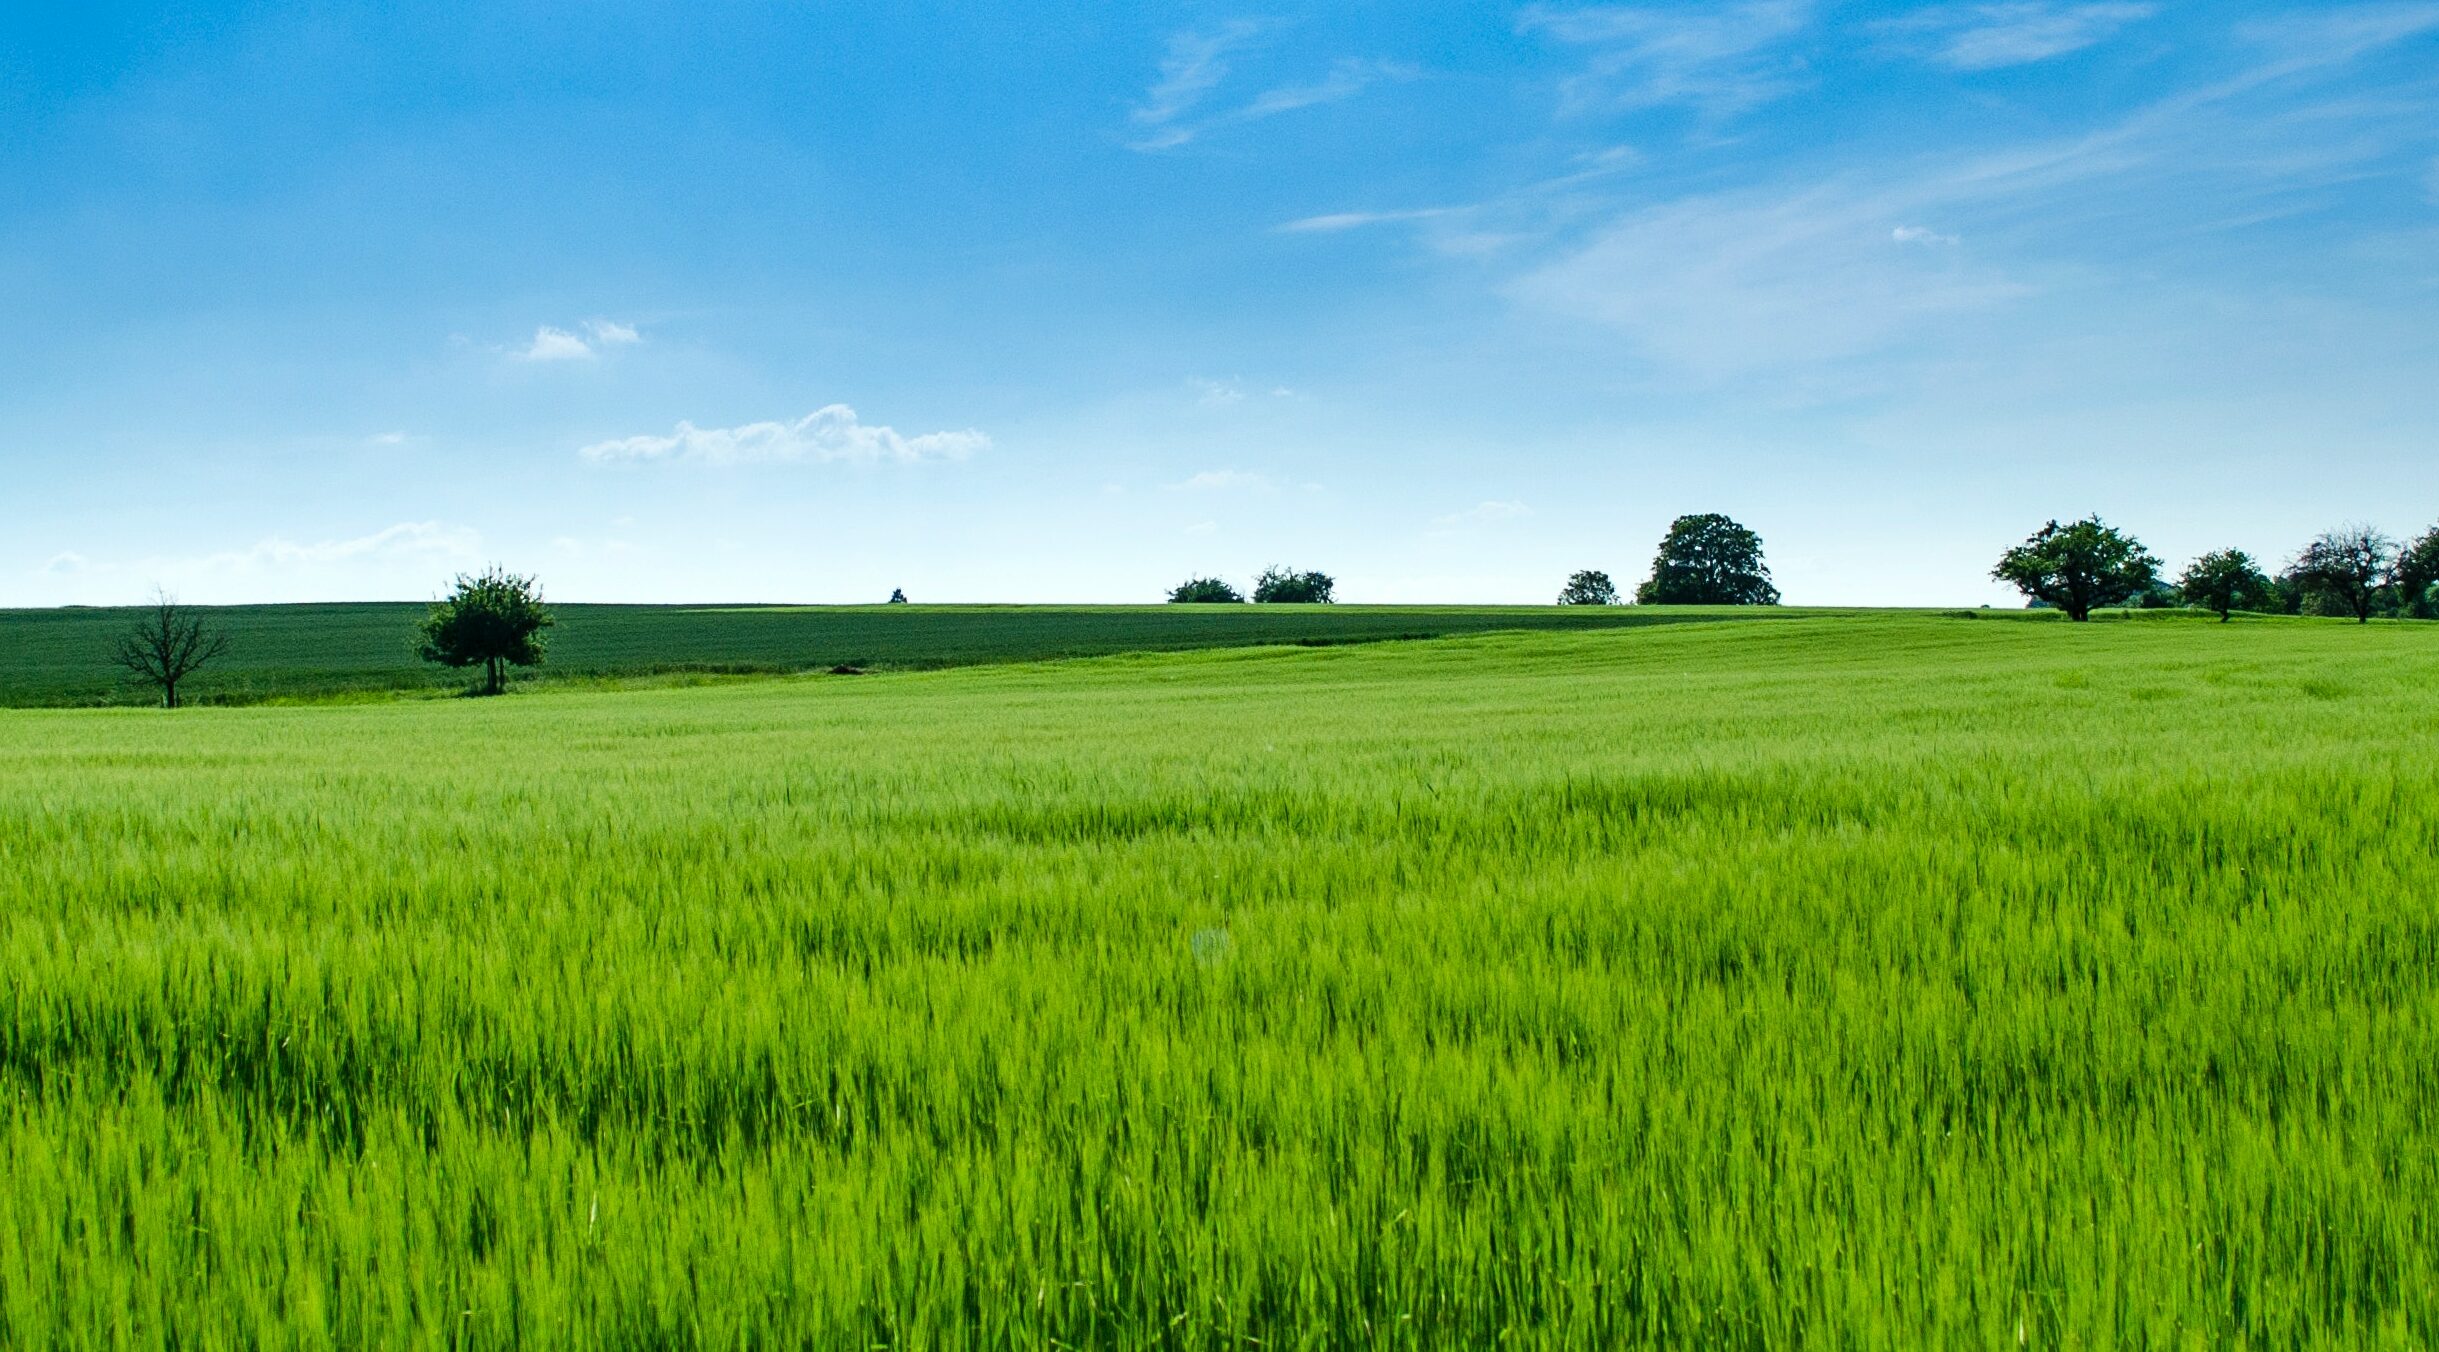 View of green field and blue sky with trees in the distance